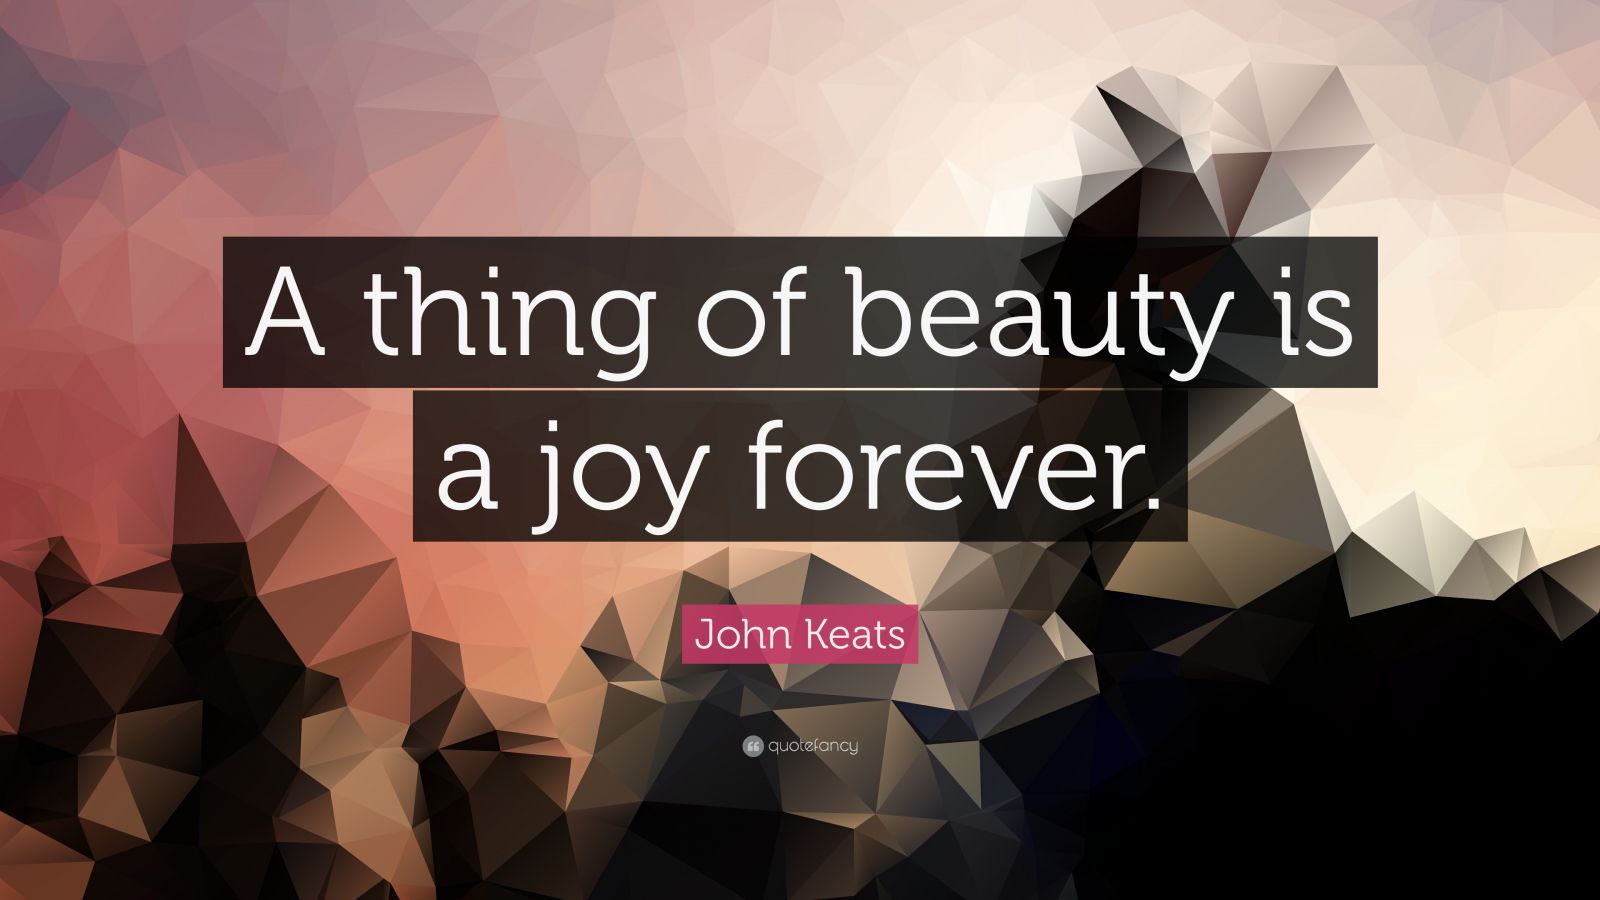 John Keats Quote: “A thing of beauty is a joy forever.” (12 wallpapers) - Quotefancy1600 x 900